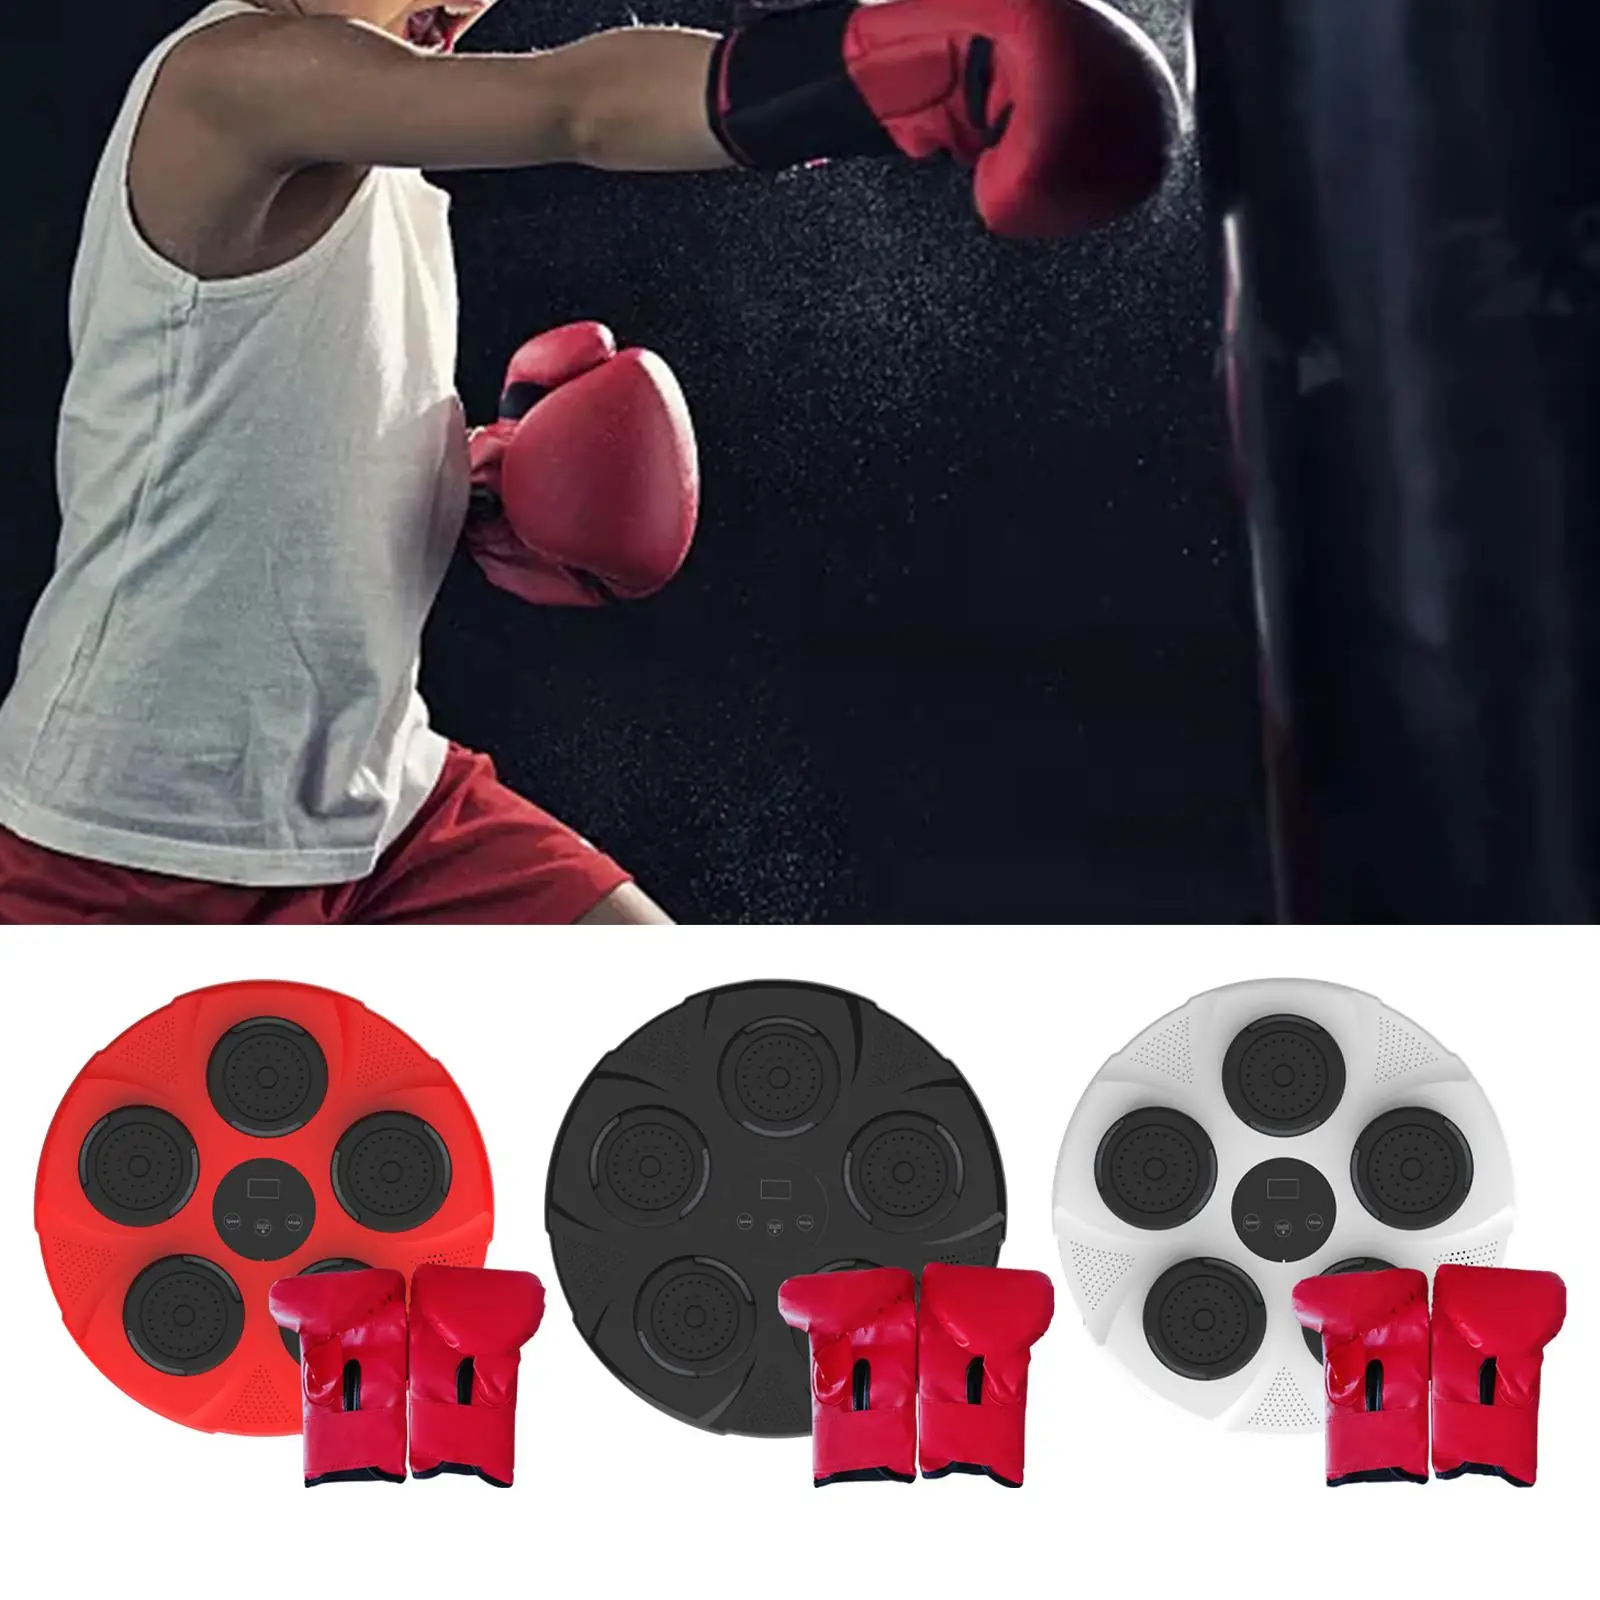 Boxing Machine Music Boxing Machine Wall Target with Boxing Gloves with Light for Kickboxing Practice Exercise Karate Sports